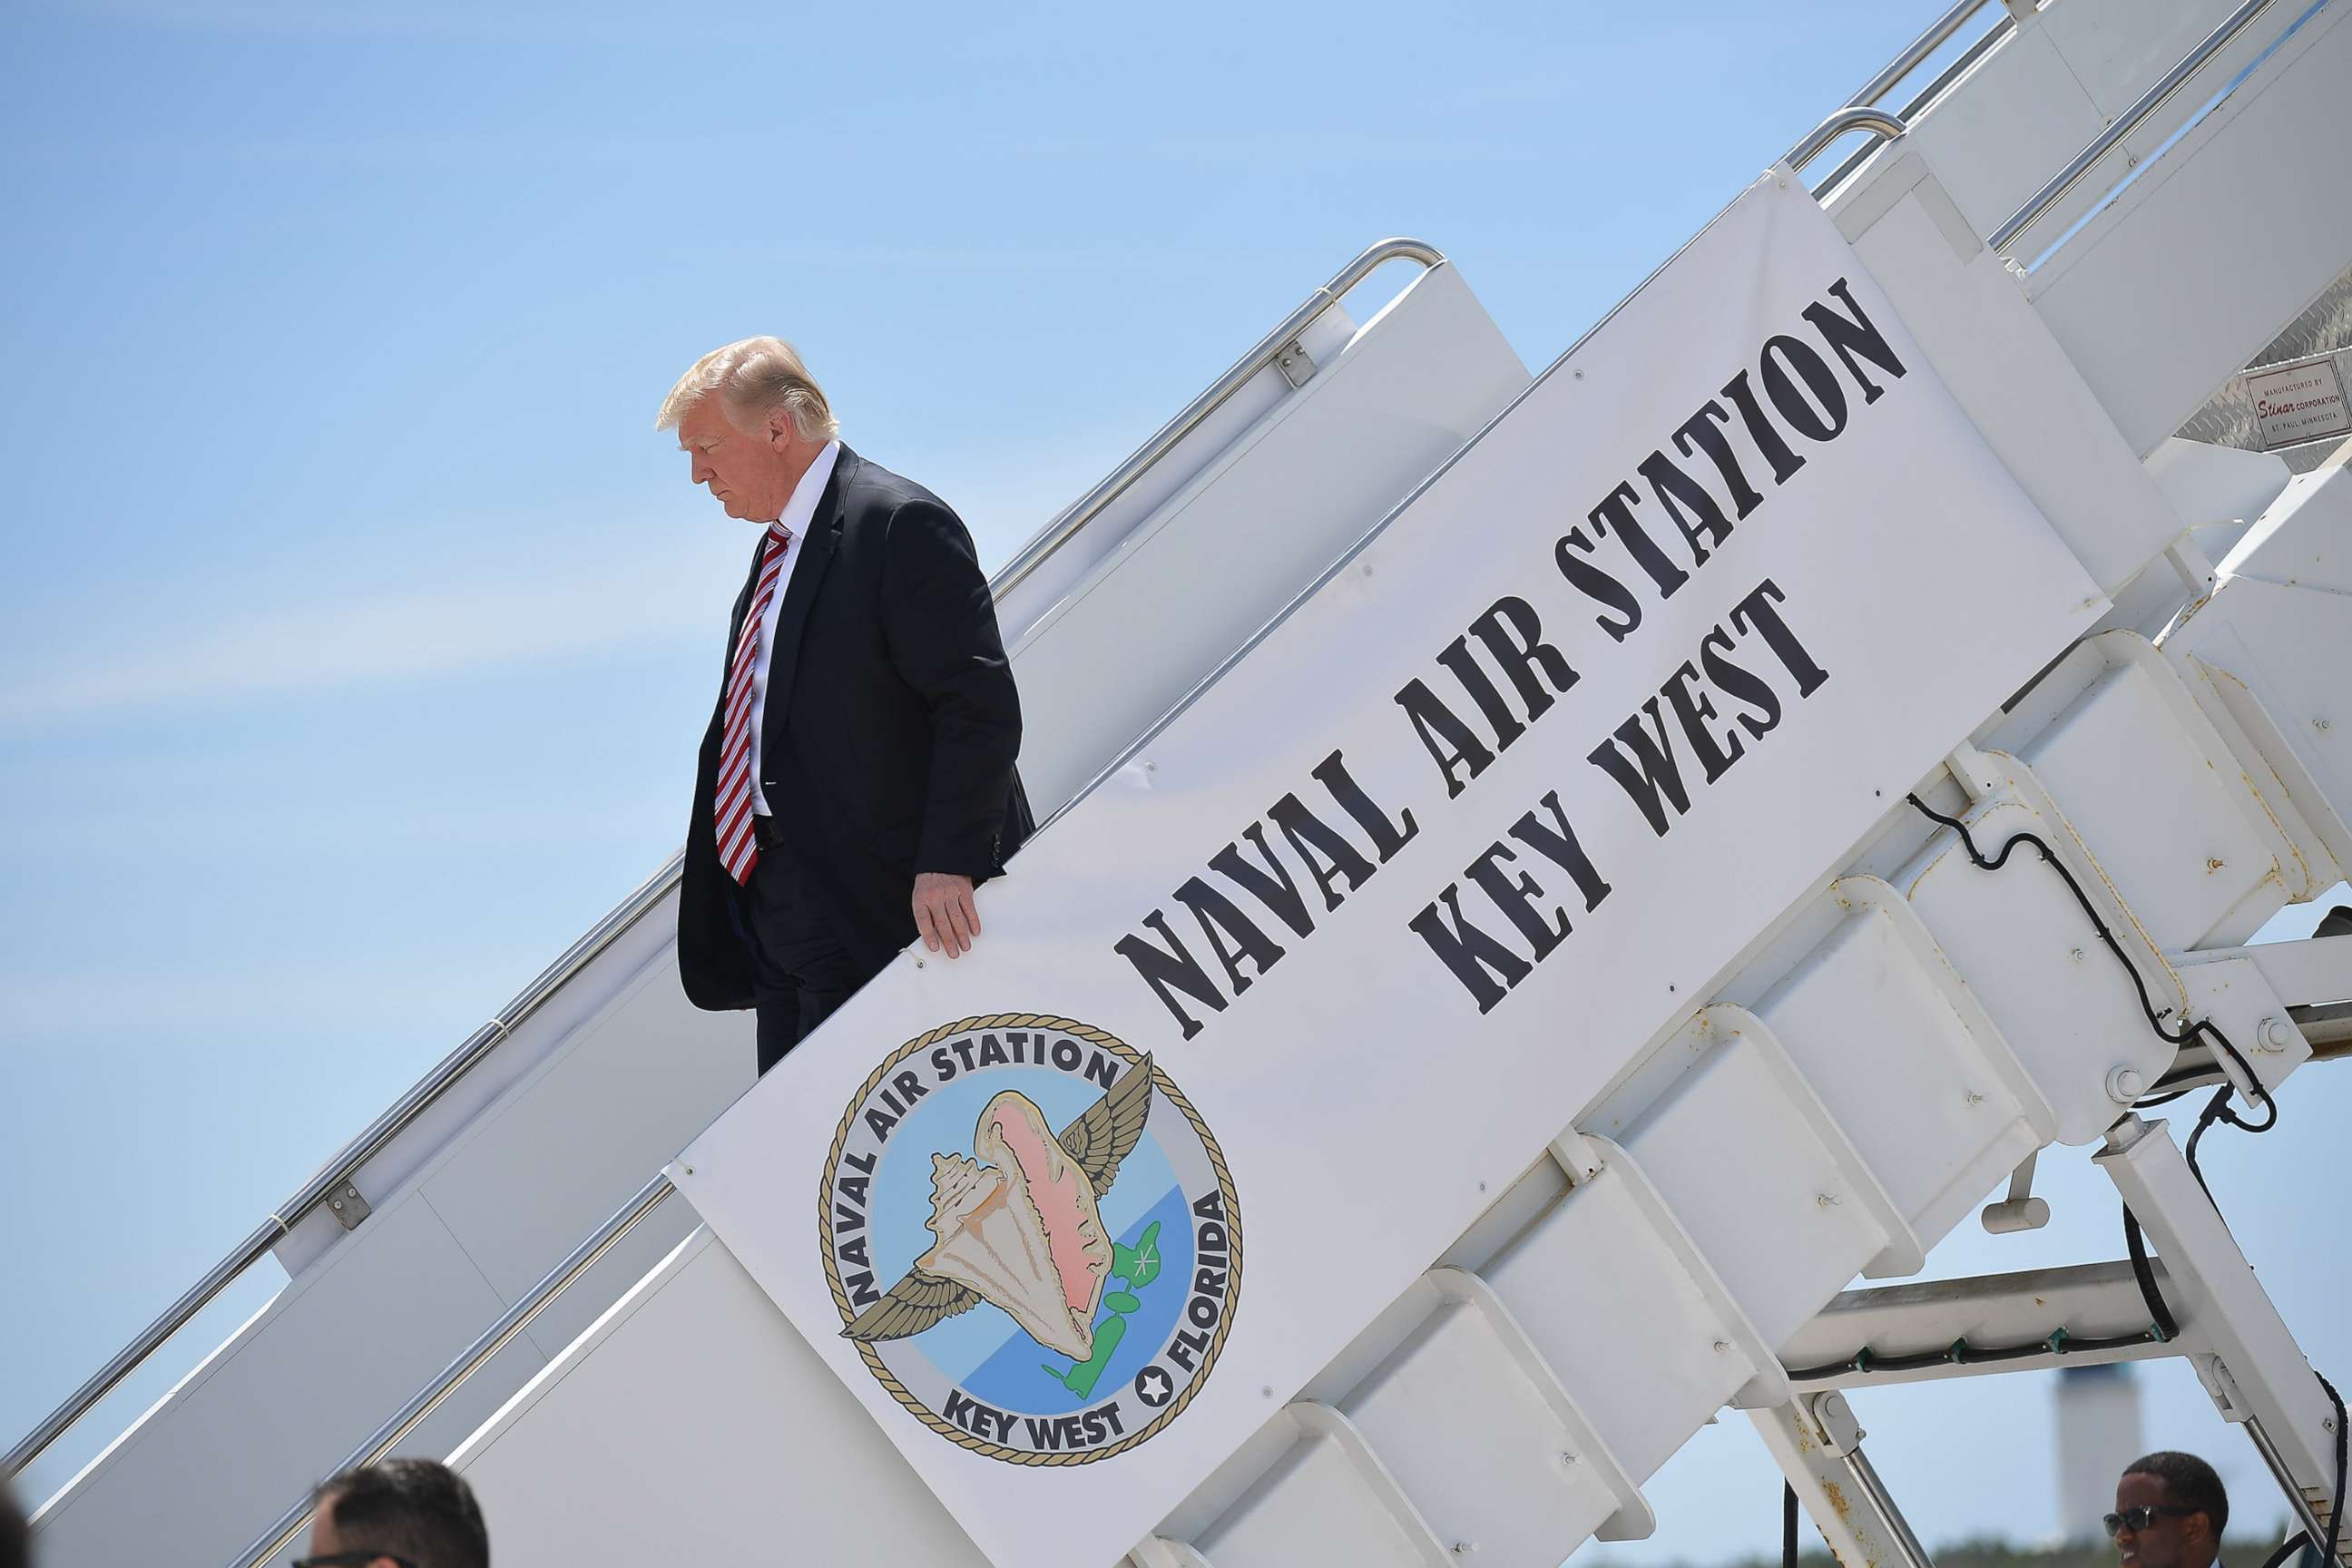 PHOTO: President Donald Trump steps off Air Force One upon arrival at Naval Air Station Key West in Key West, Fla., April 19, 2018.